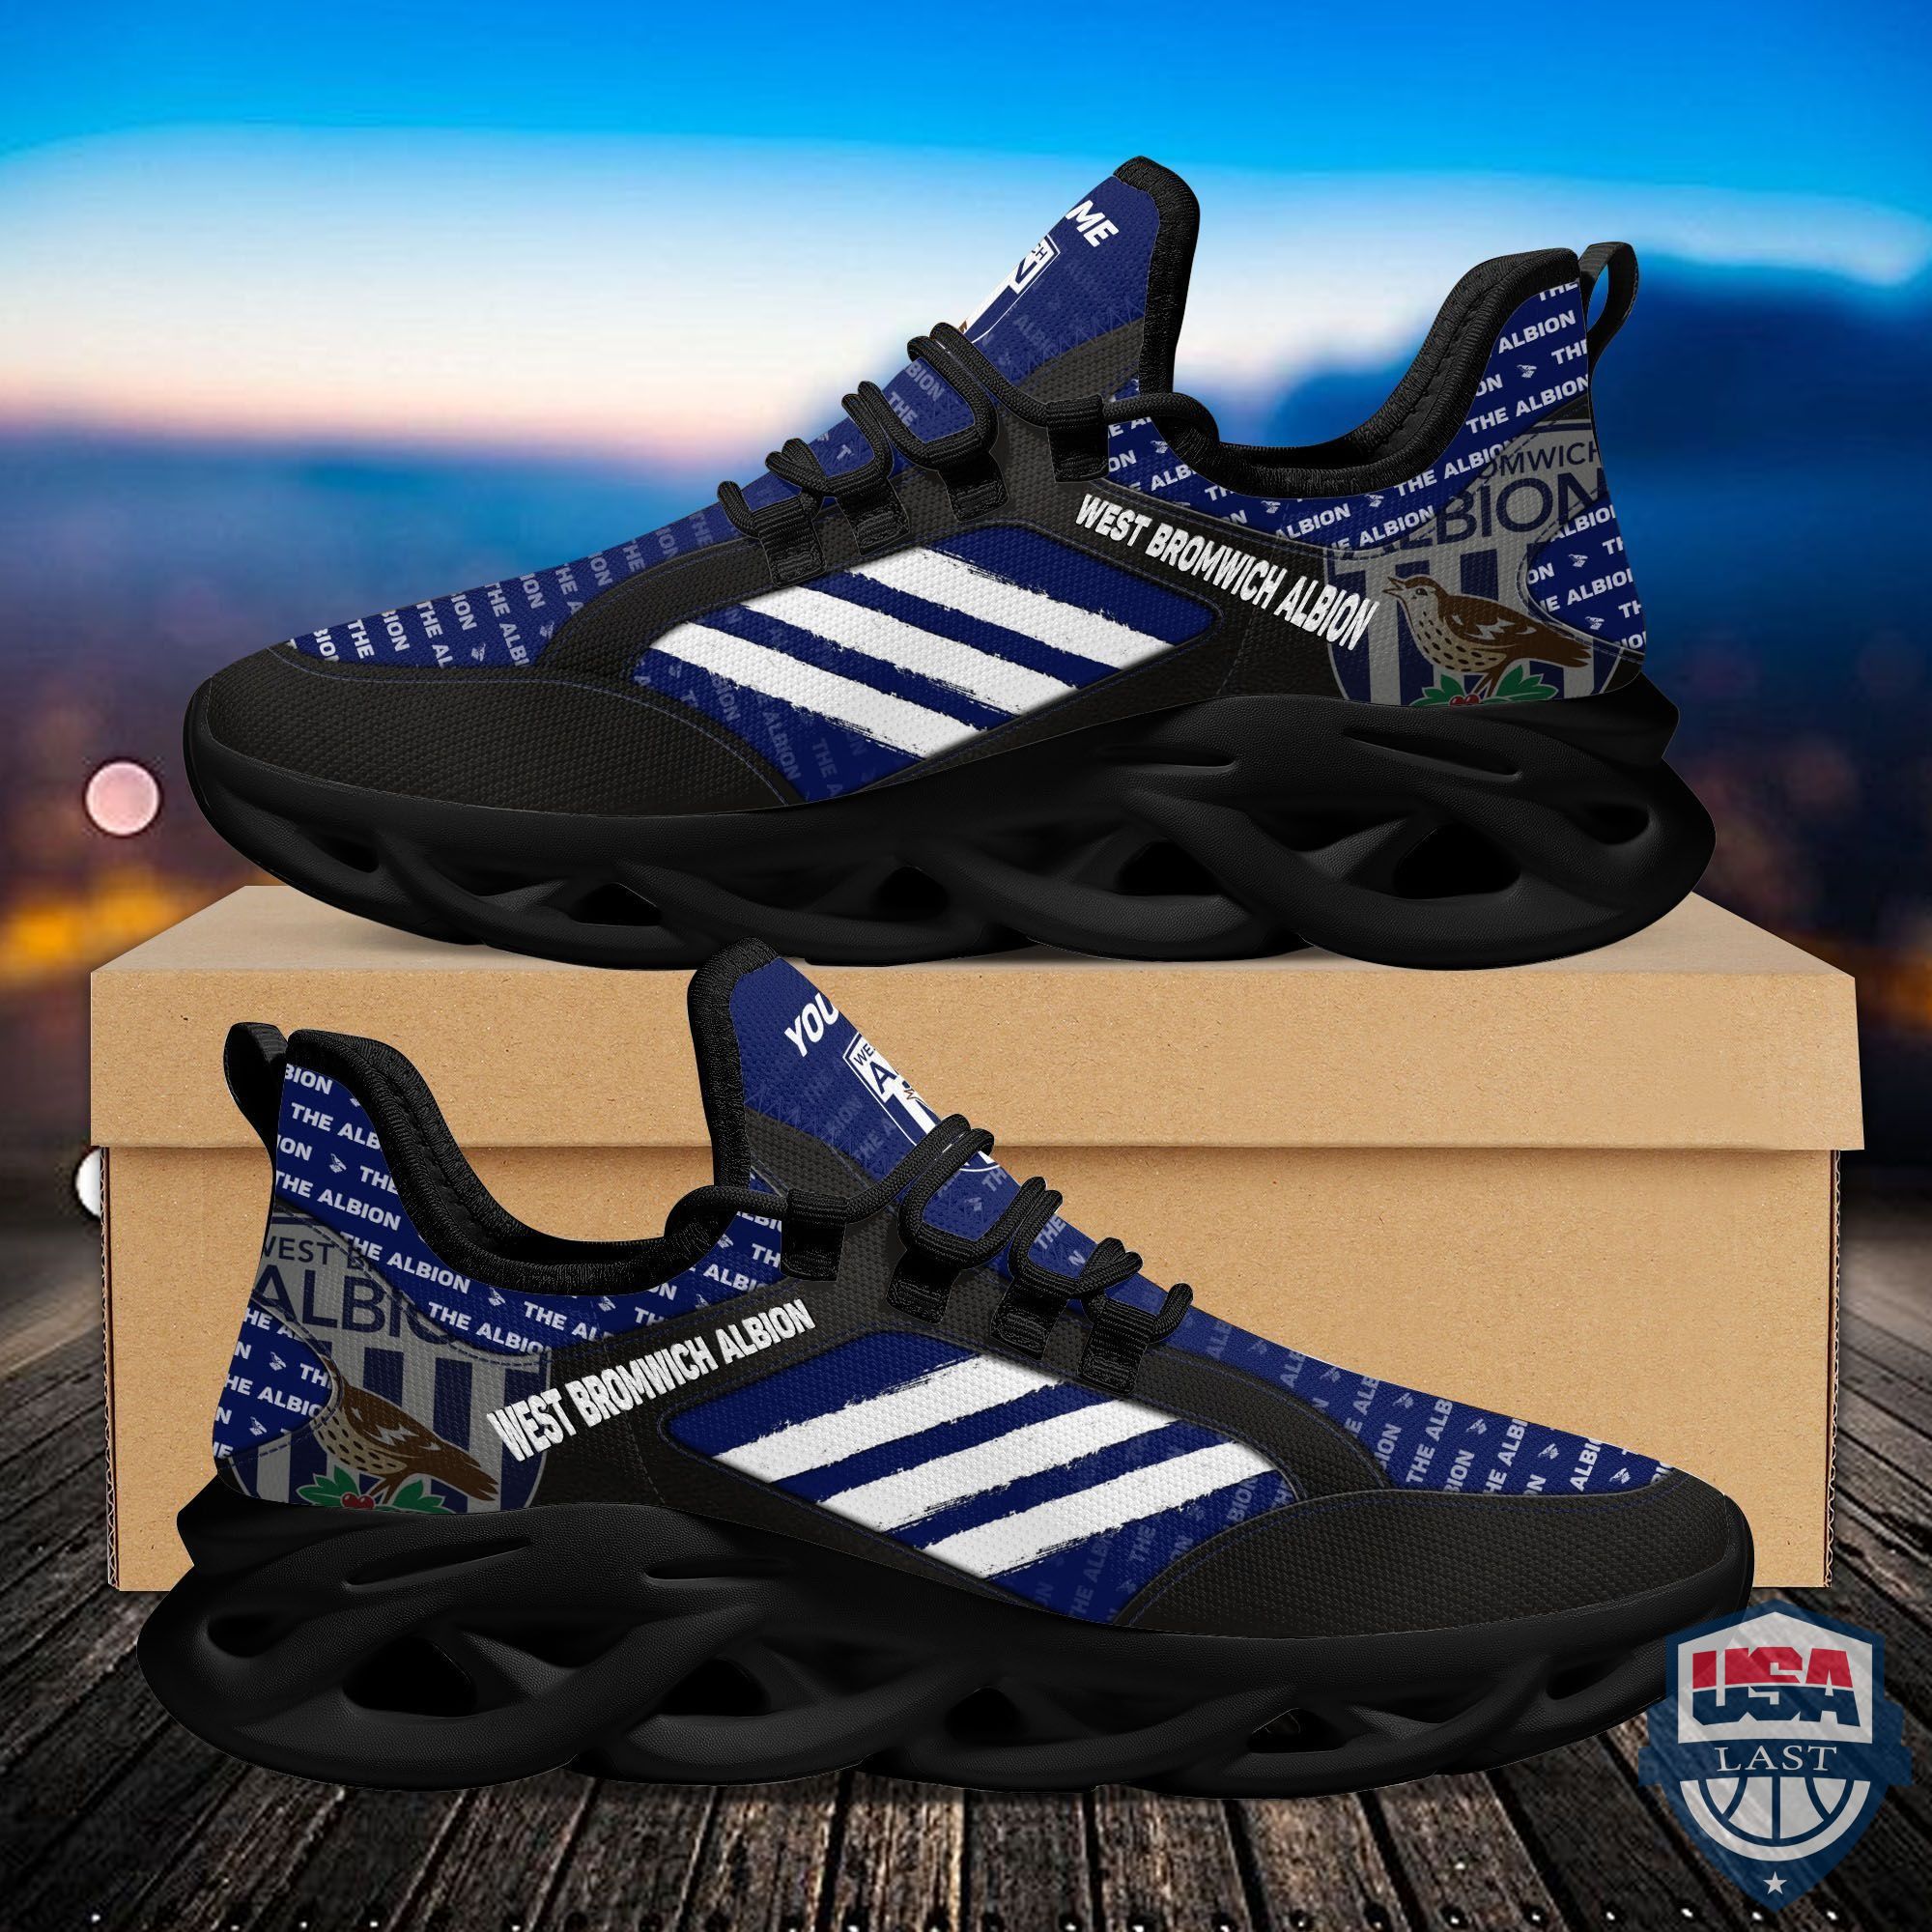 3ZBeBxVF-T140122-140xxxPersonalized-West-Bromwich-Albion-Max-Soul-Sneakers-Running-Shoes.jpg